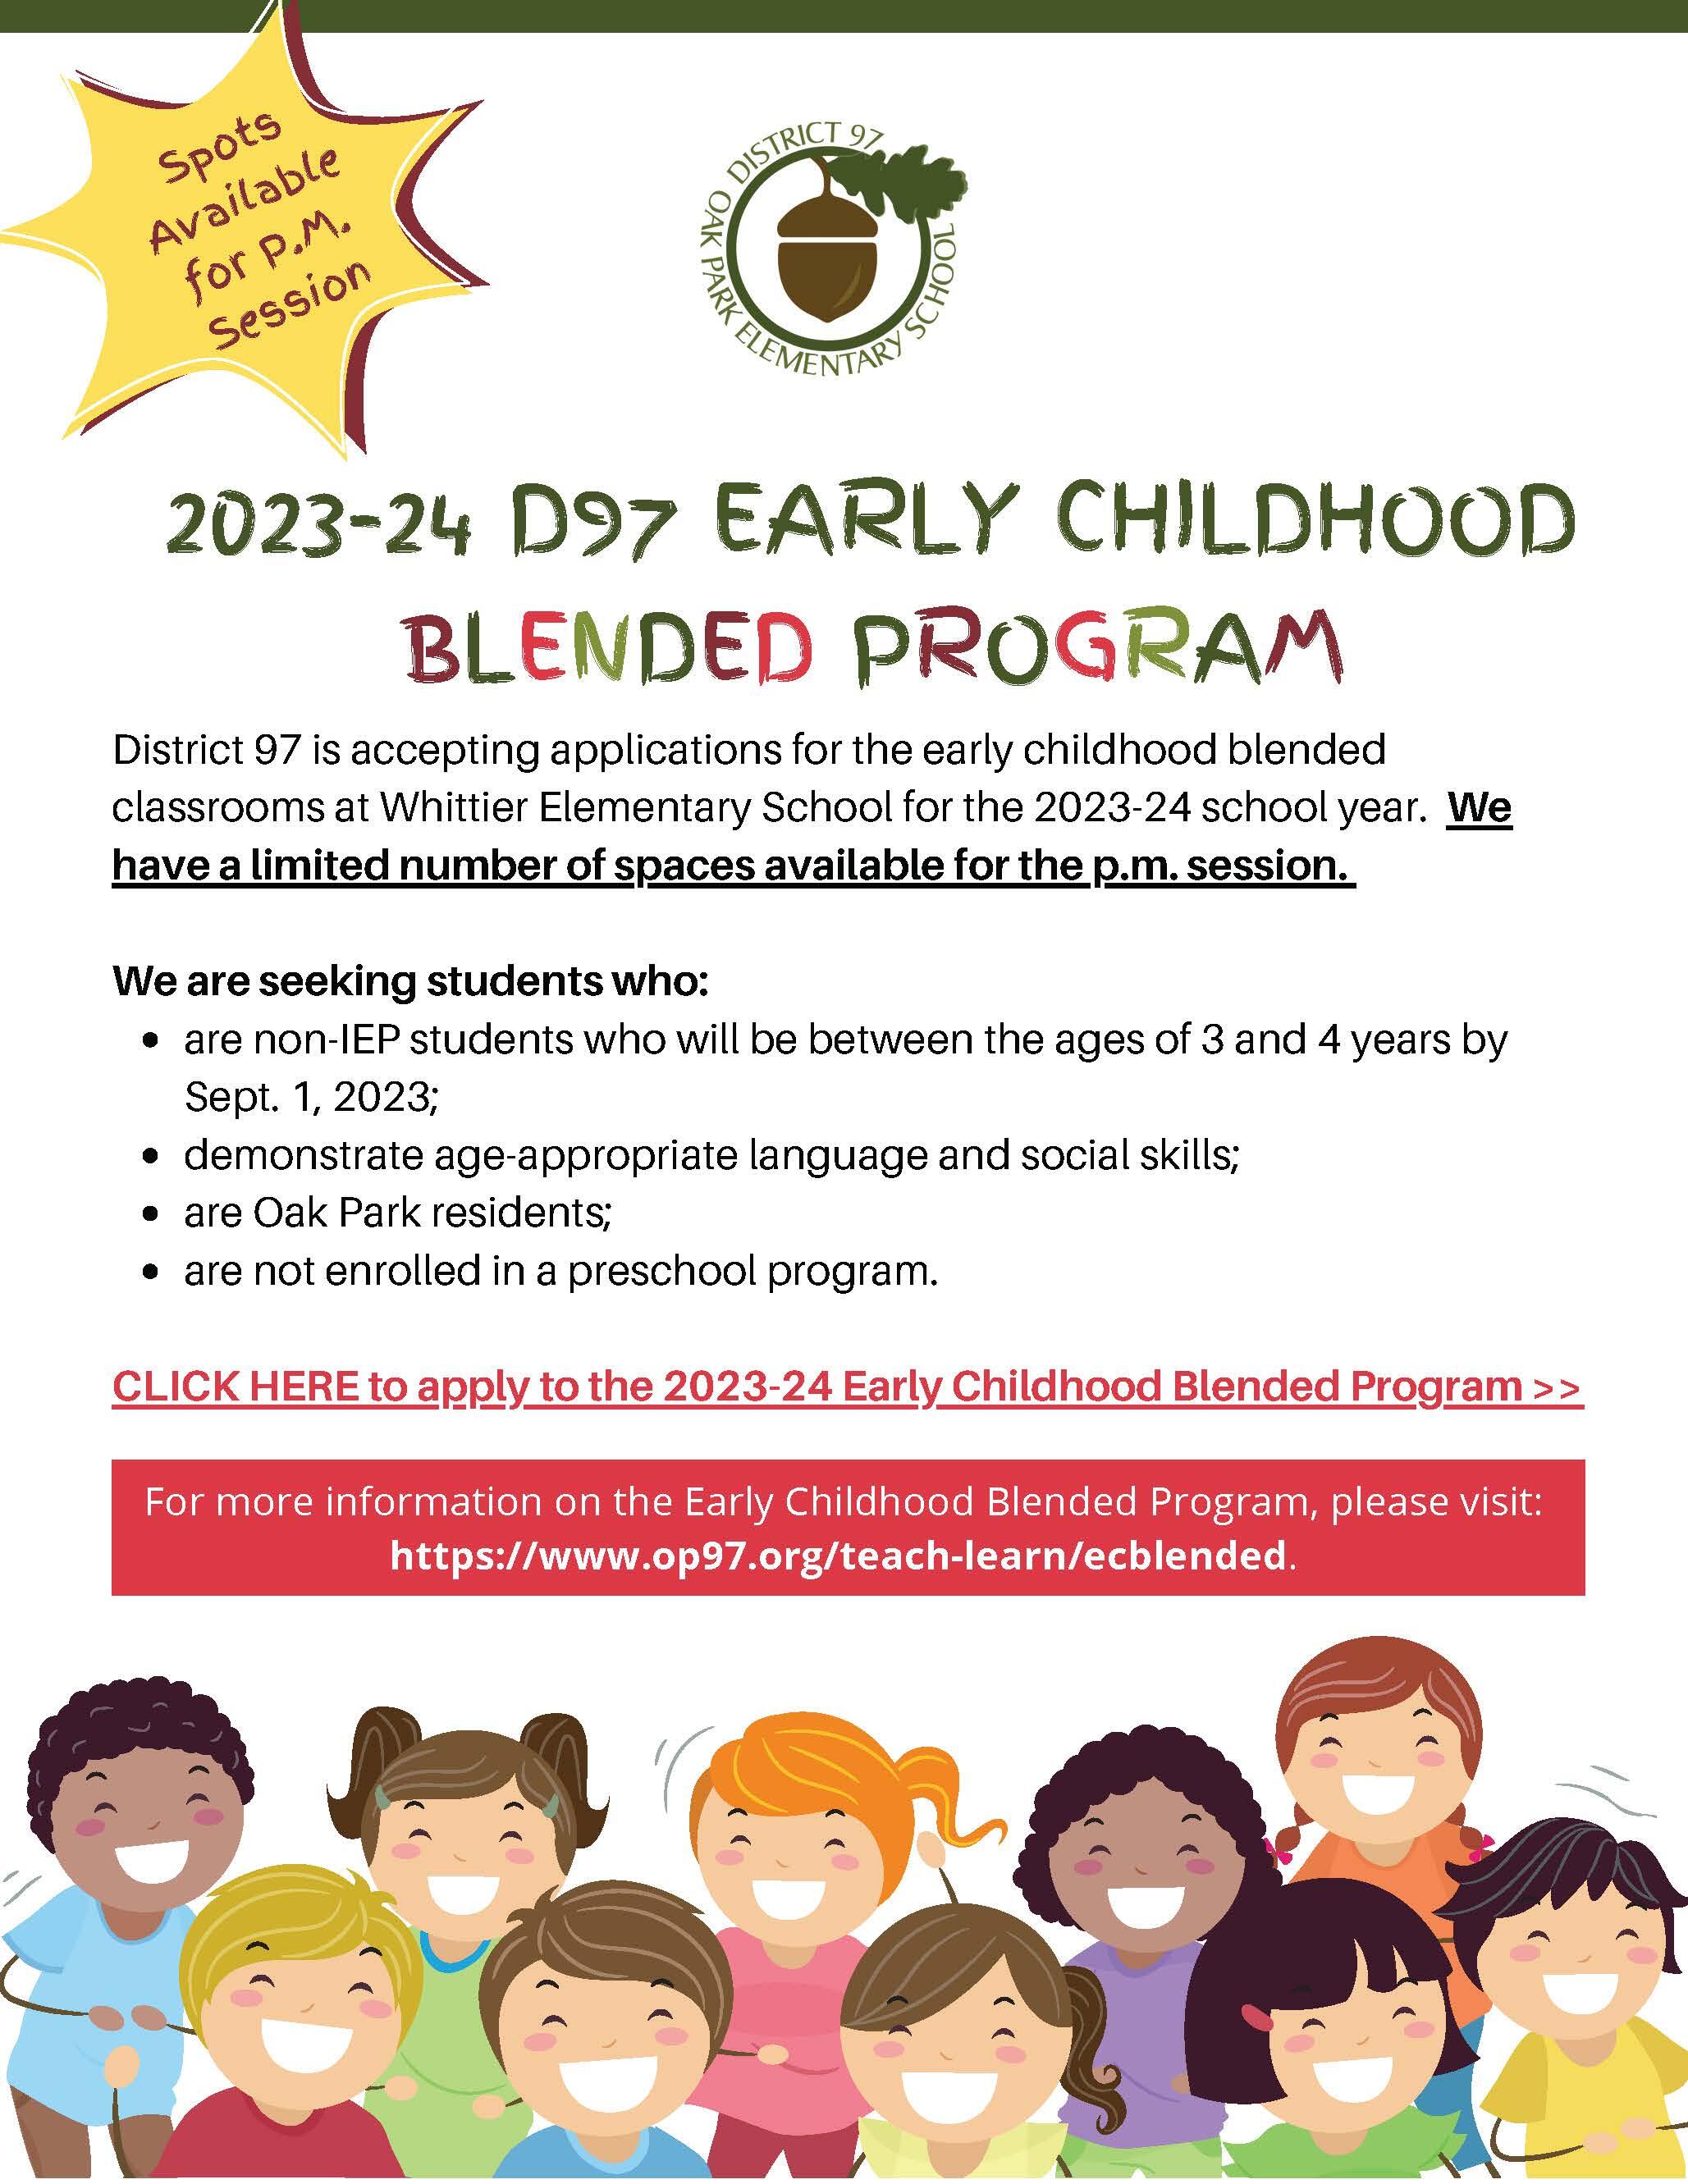 Thumbnail of the D97 Early Childhood Blended Program information